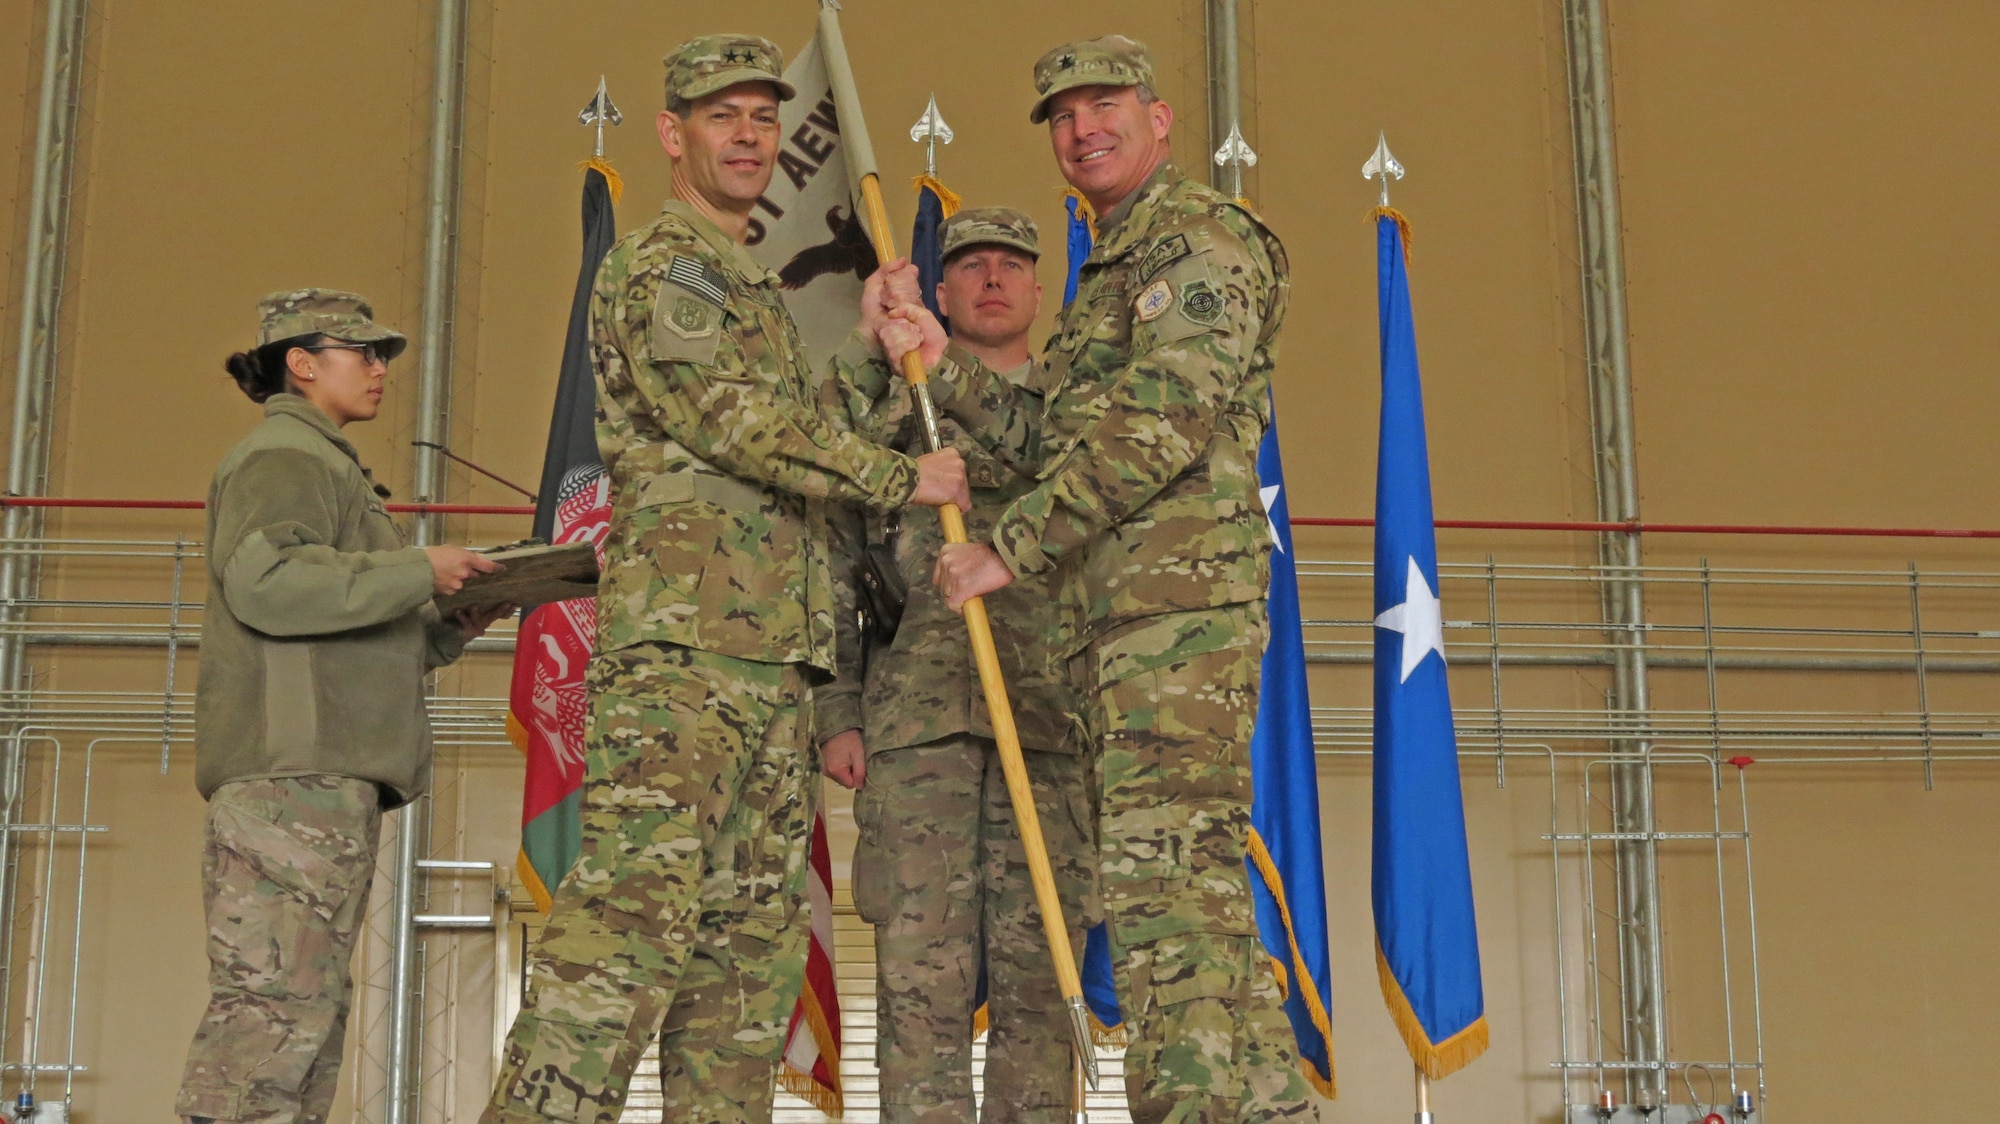 U.S. Air Force Maj. Gen. Kenneth Wilsbach, Commander, 9th Air and Space Expeditionary Task Force-Afghanistan; Deputy Commander-Air, U.S. Force-Afghanistan; and Deputy Chief of Staff-Air, International Security Assistance Force Joint Command, receives the 451st Air Expeditionary Wing guidon from Brig. Gen. Michael Frantini, 451st AEW commander and Commander, Kandahar Airfield, in a transition ceremony at Kandahar Airfield, Afghanistan, Jan. 13, 2014. The 451st Air Expeditionary Wing was transitioned to an Air Expeditionary Group due to a change in mission.(U.S. Air Force photo by Senior Airman Alexandria Bandin/Released)                                       